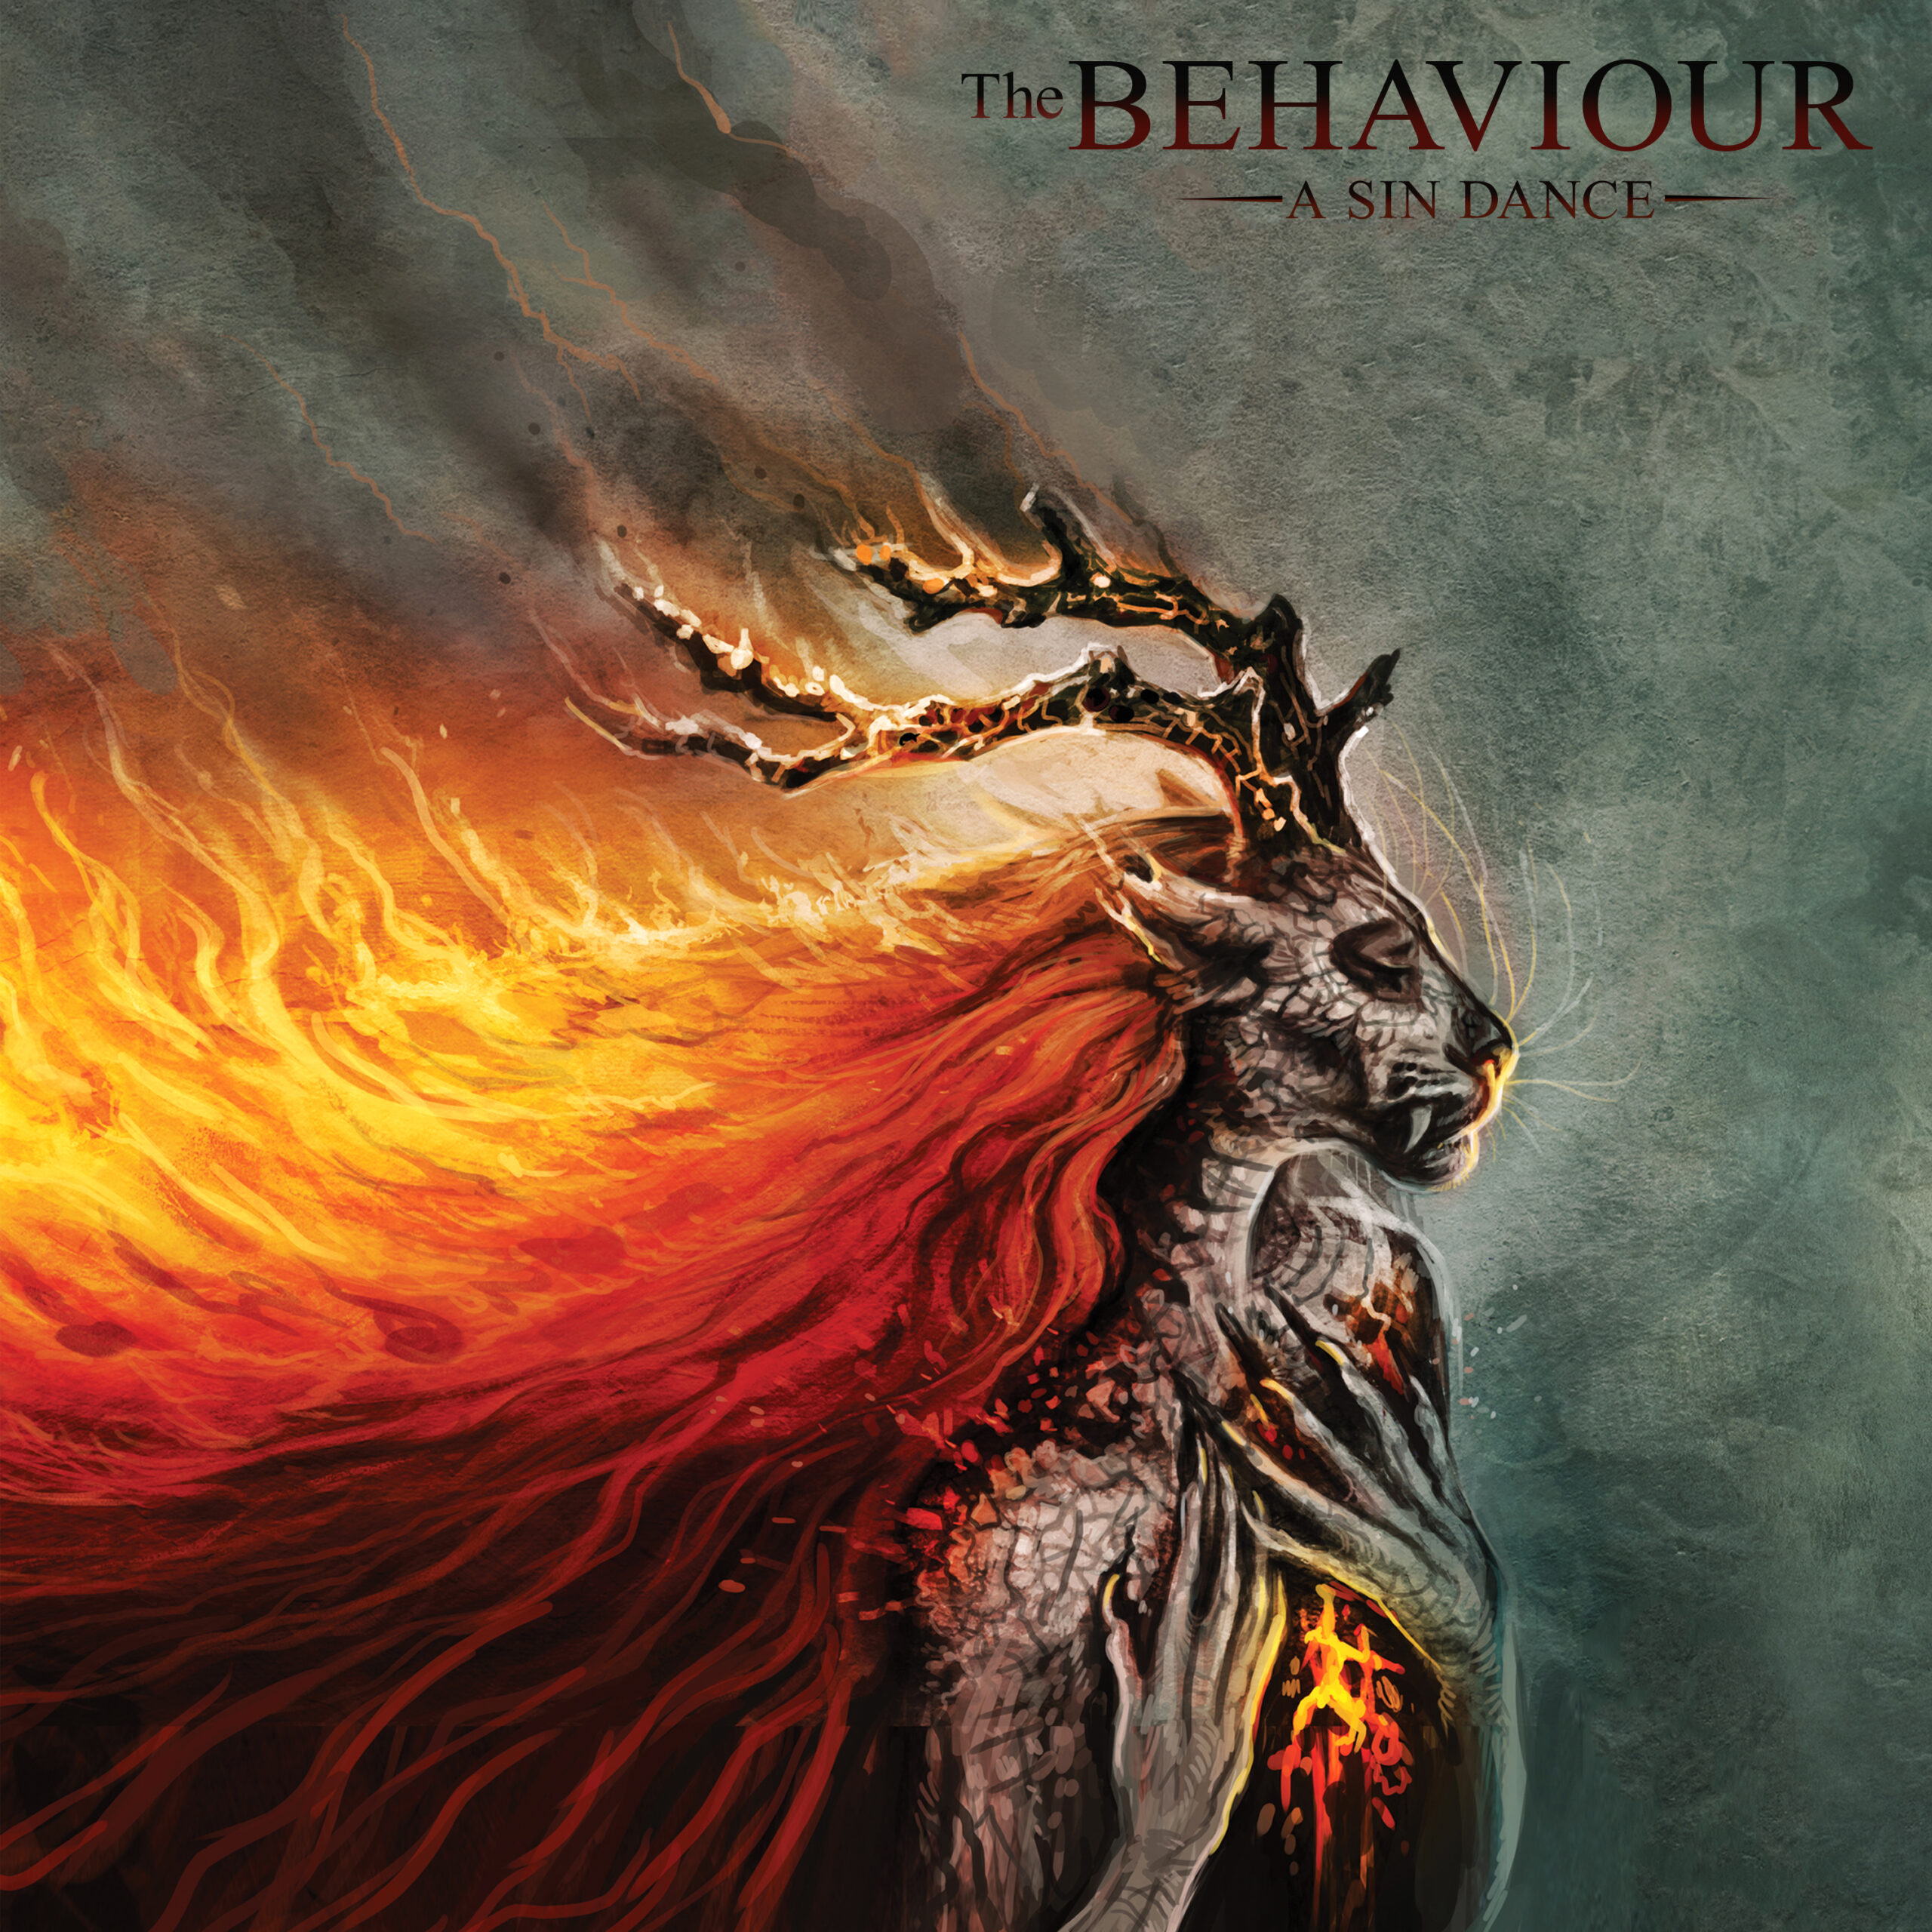 'A Sin Dance' by The Behaviour